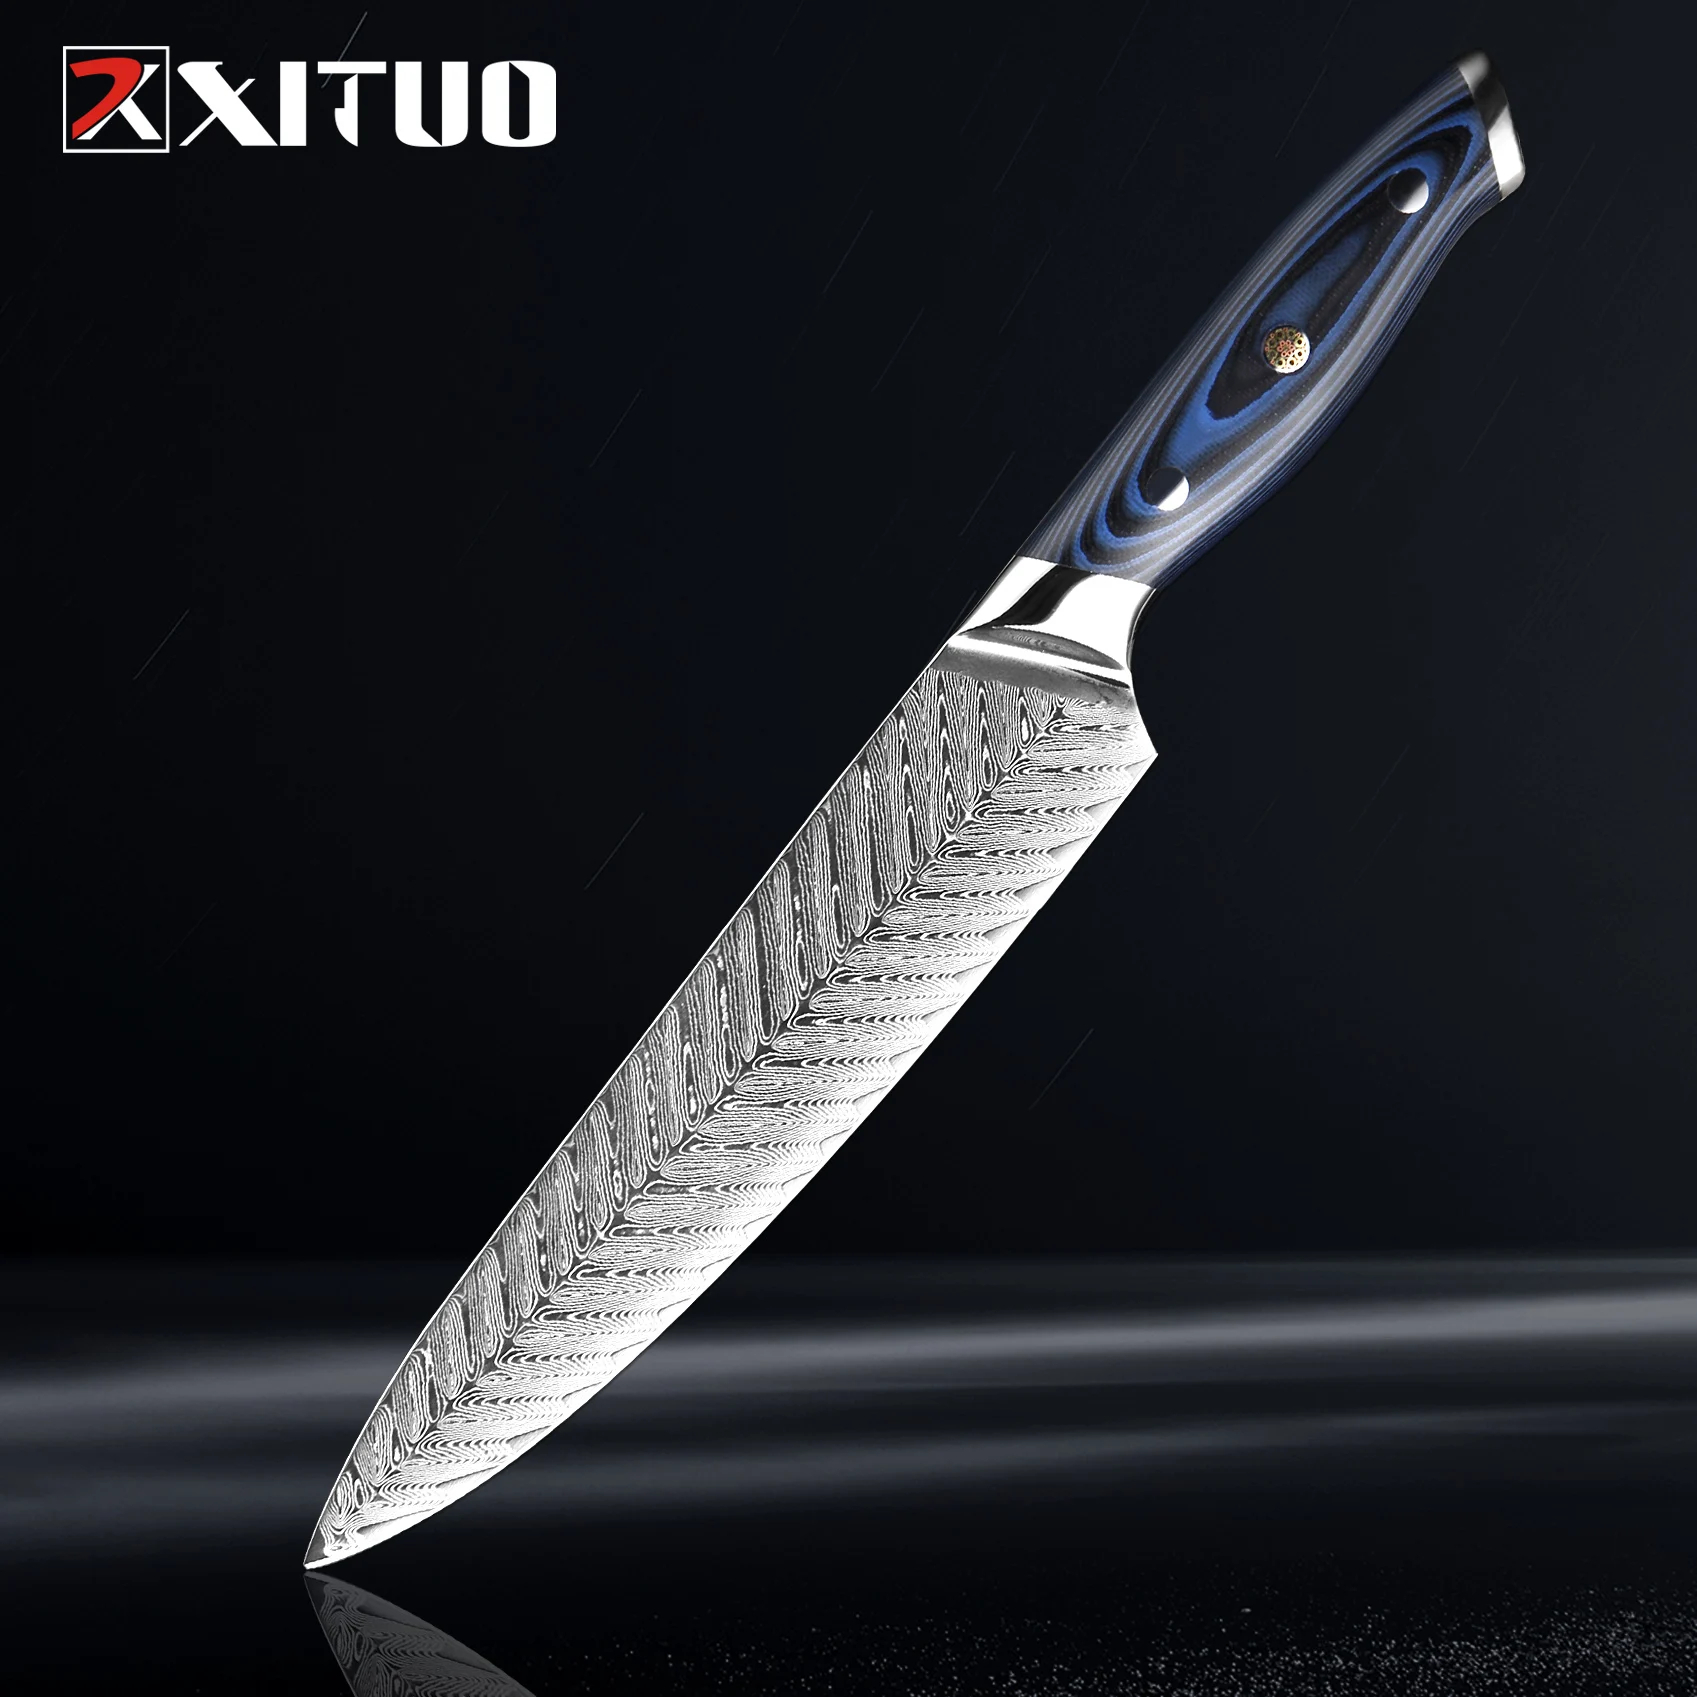 

XITUO 8"Damascus Knife Japanese professional chef's knife VG10 Steel high hardness sharp slicing meat cleaver kitchen Tool Gift